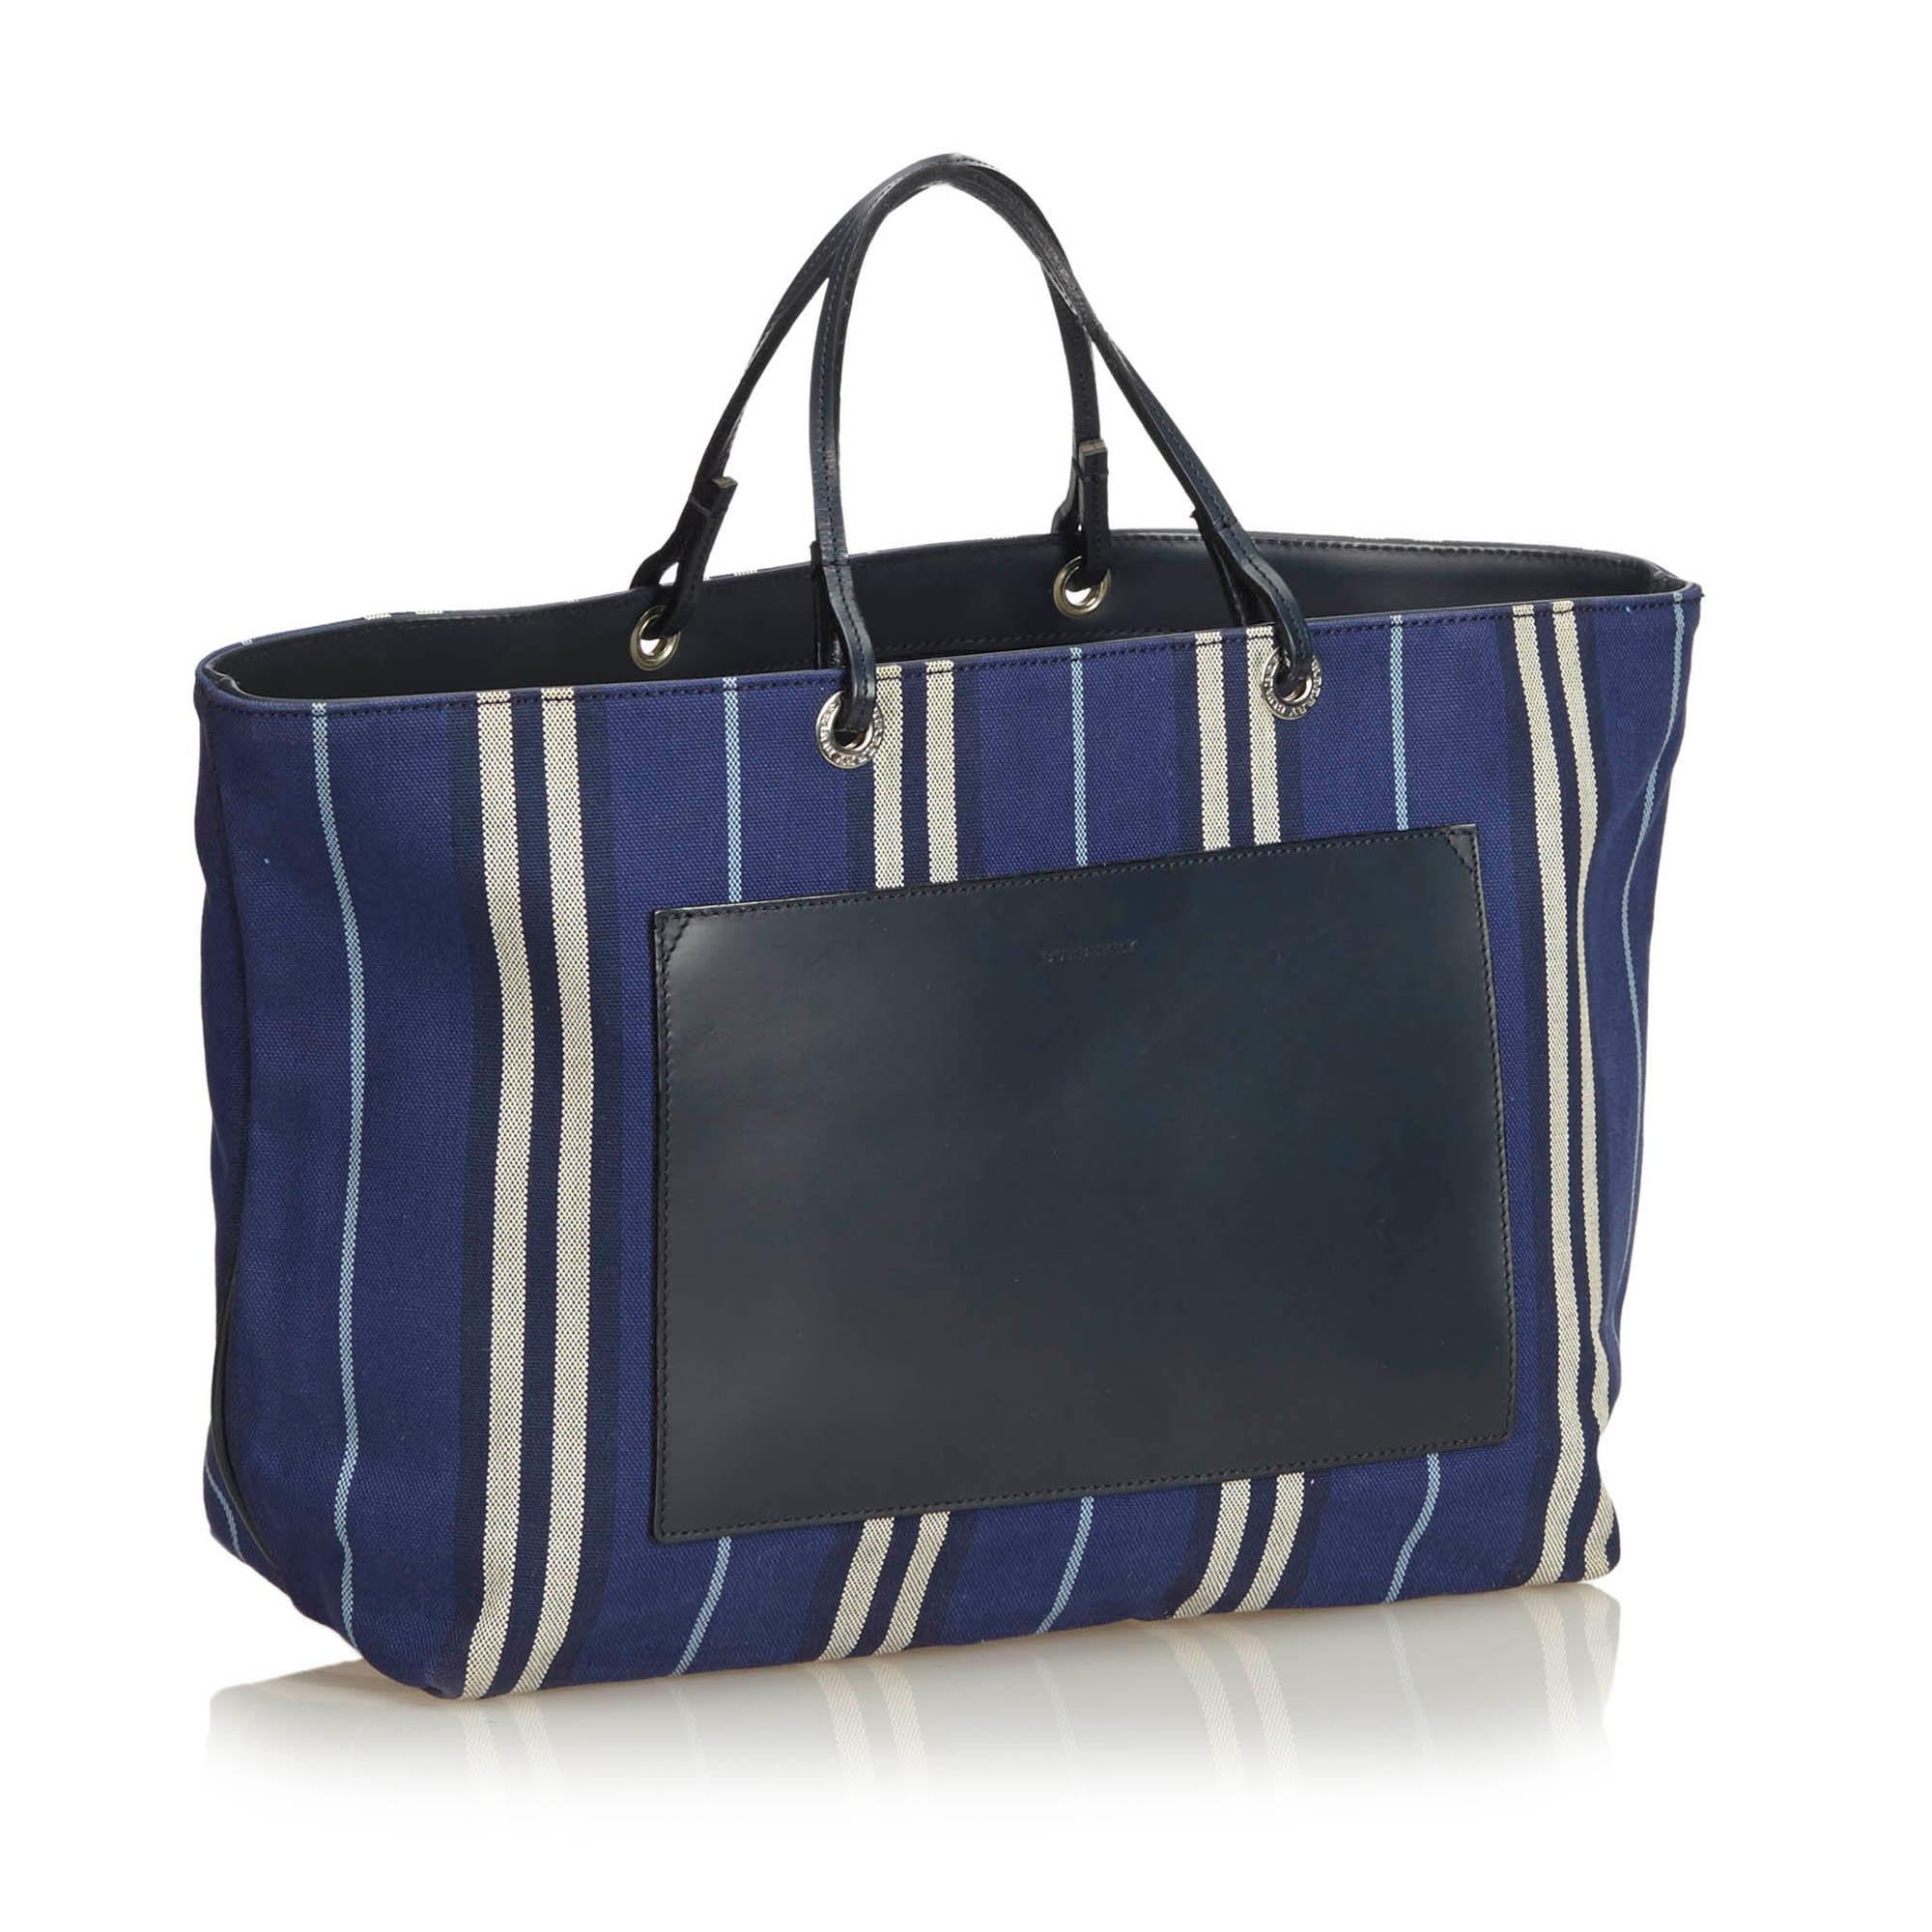 This tote bag features a striped jacquard body with leather trim, flat leather straps, open top, and an exterior slip pocket. It carries as AB condition rating.

Inclusions: 
This item does not come with inclusions.

Dimensions:
Length: 26.50